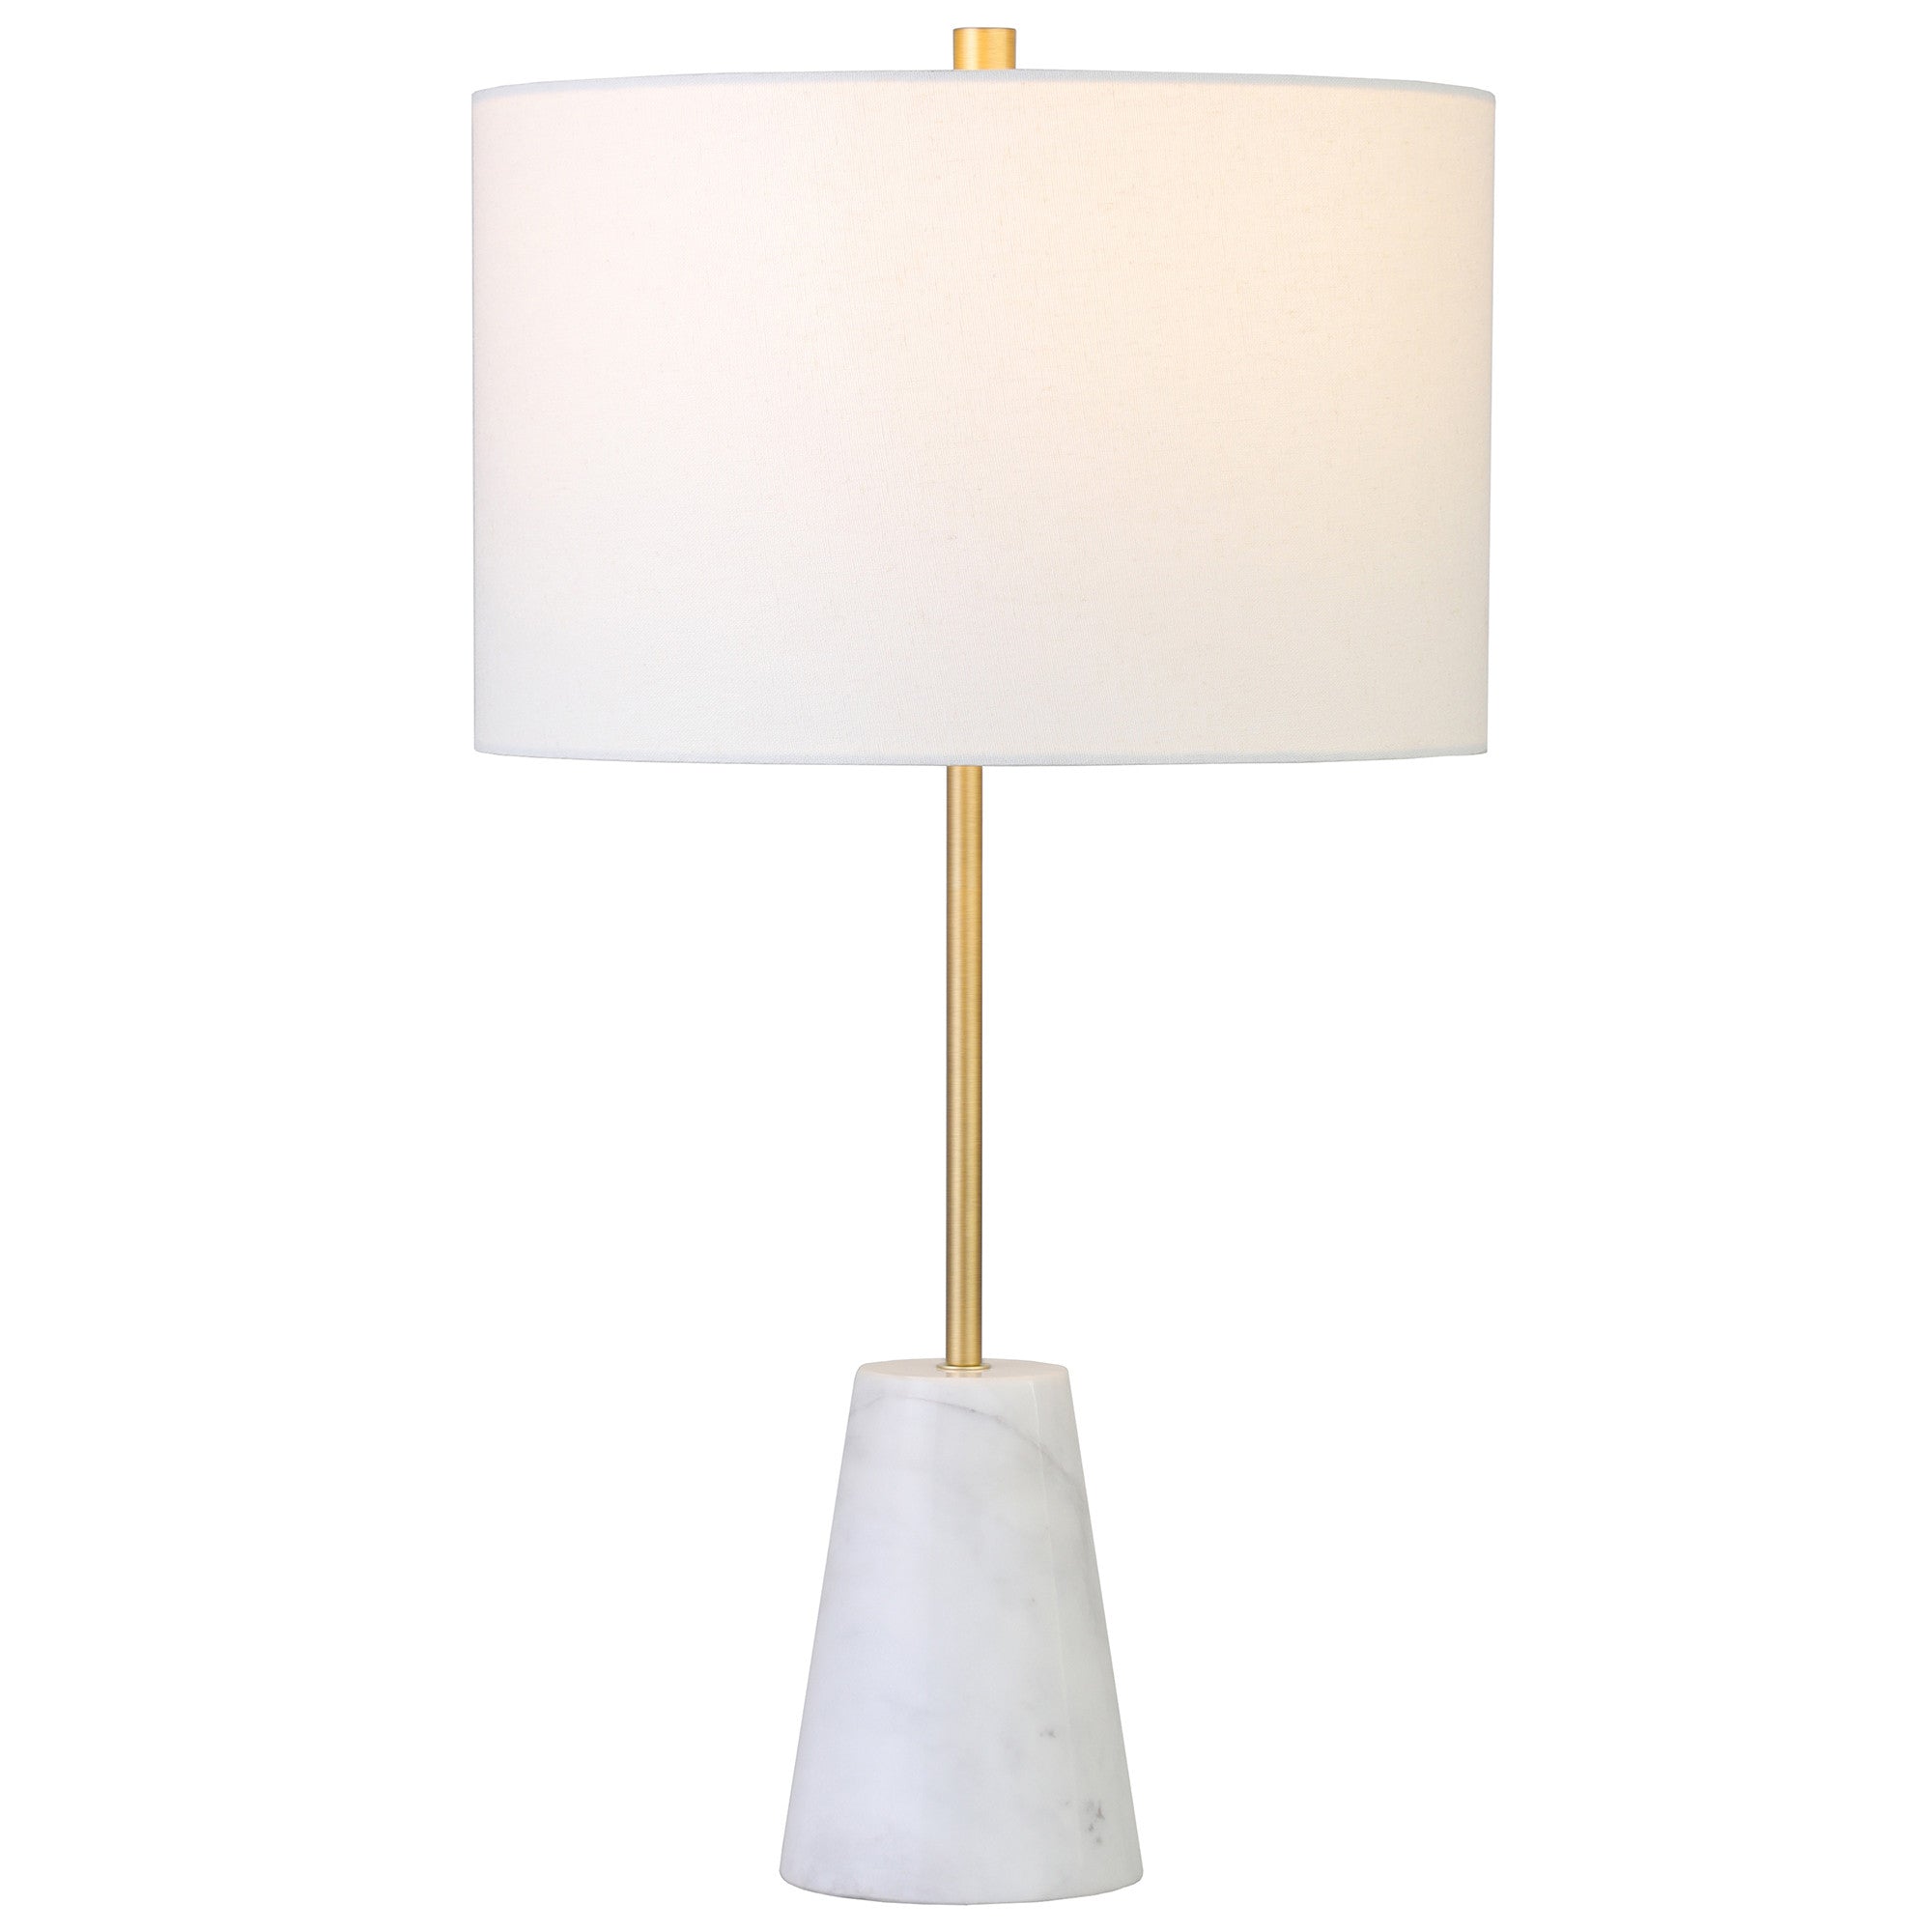 26" Gold and White Marble Table Lamp With White Drum Shade